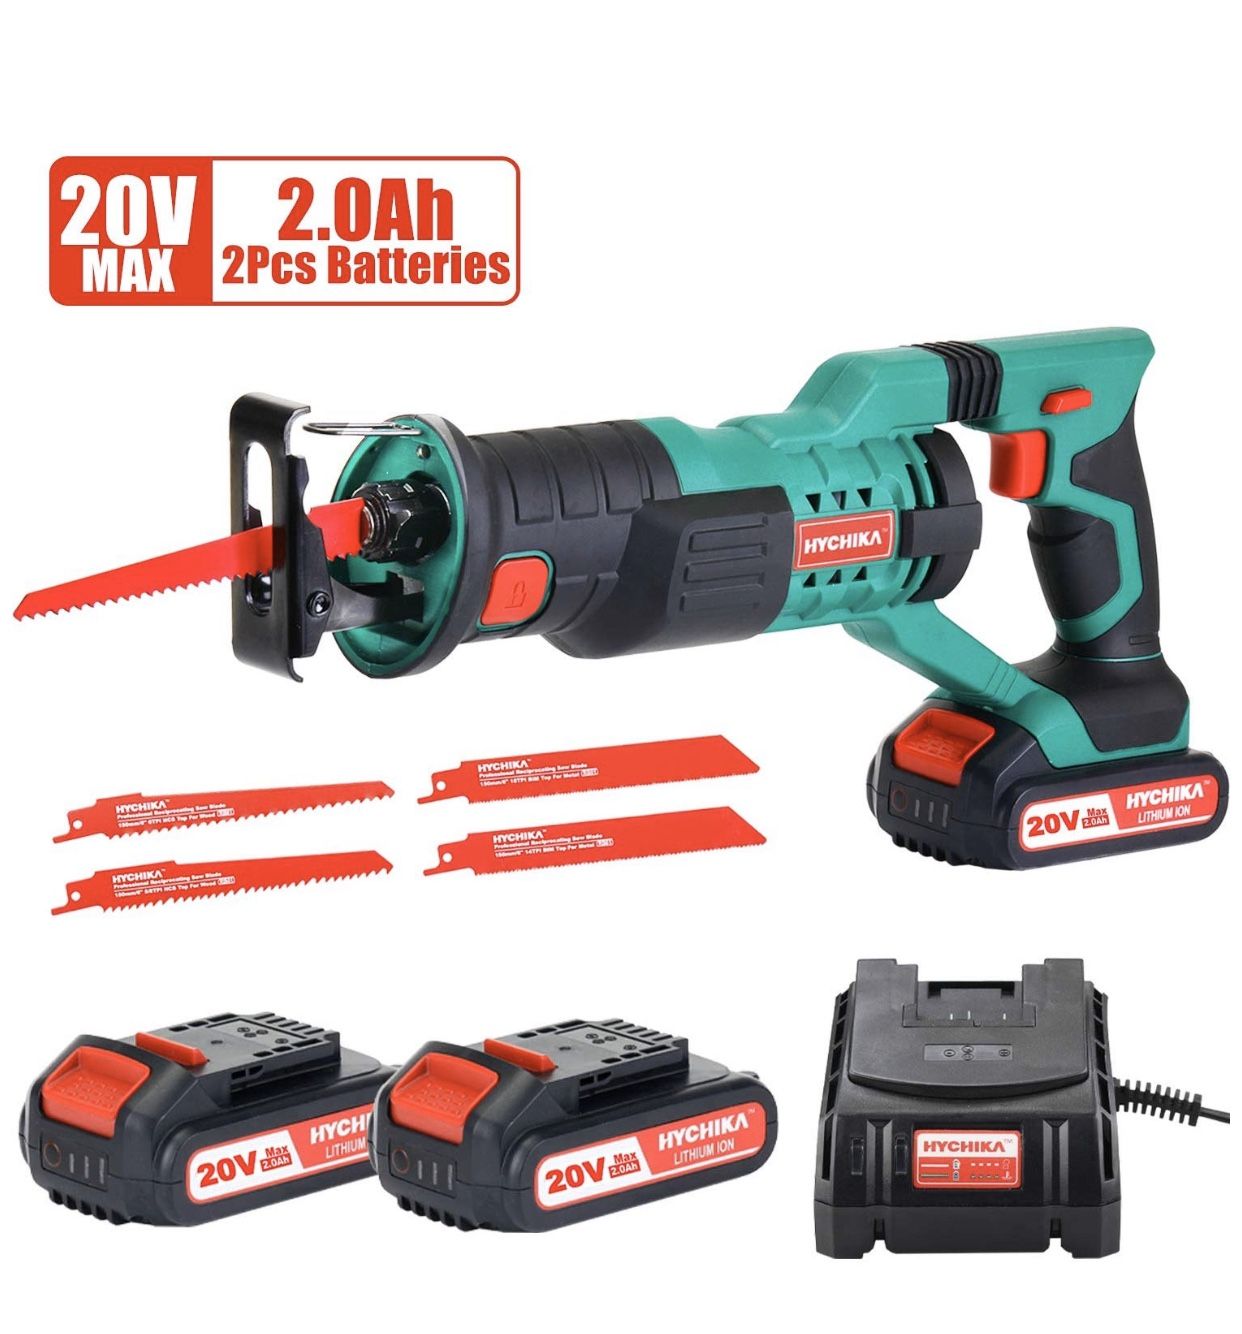 Reciprocating Saw 20V 2Ah 2 Batteries 4 Saw Blades, 0-2800SPM Variable Speed, 7/8" Stroke Length Tool-Free Blade Change LED Light for Wood Metal Cut